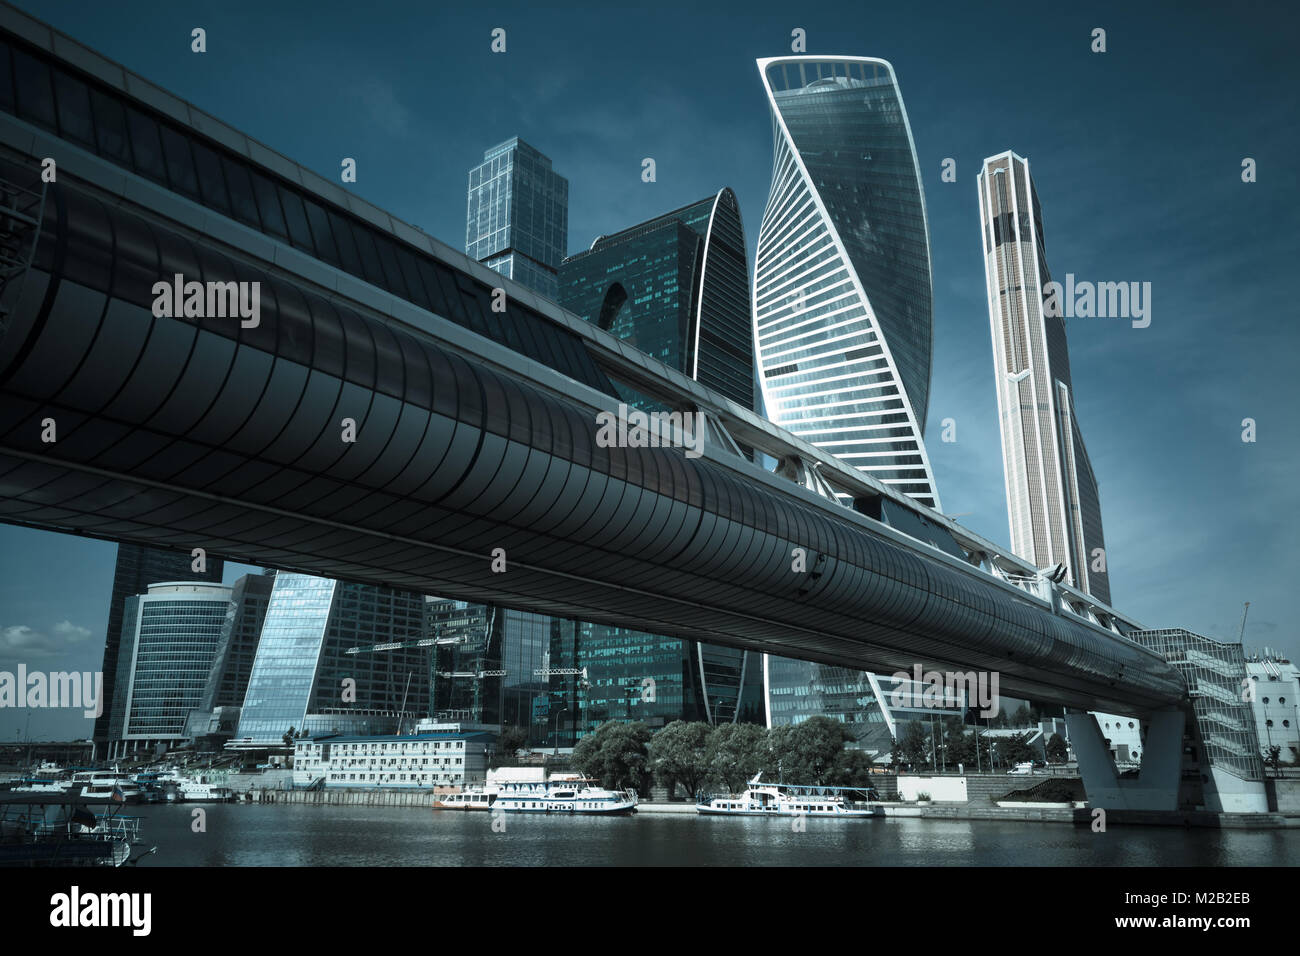 Moscow City Business Center mit Overhead passage Stockfoto